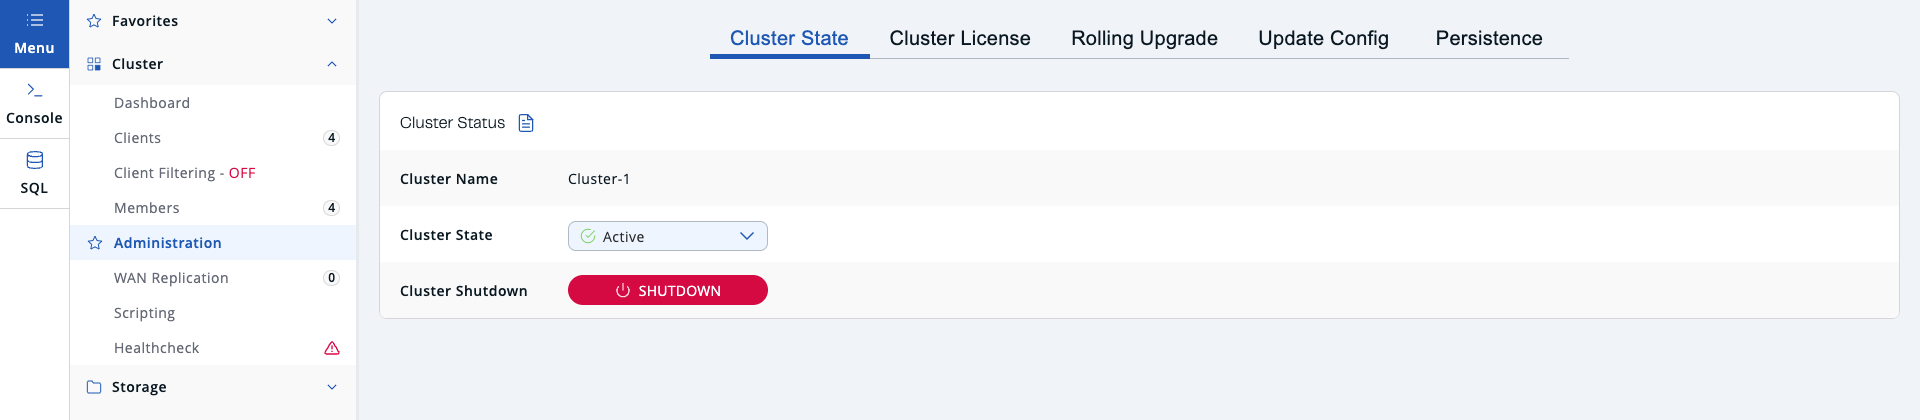 Changing Cluster state